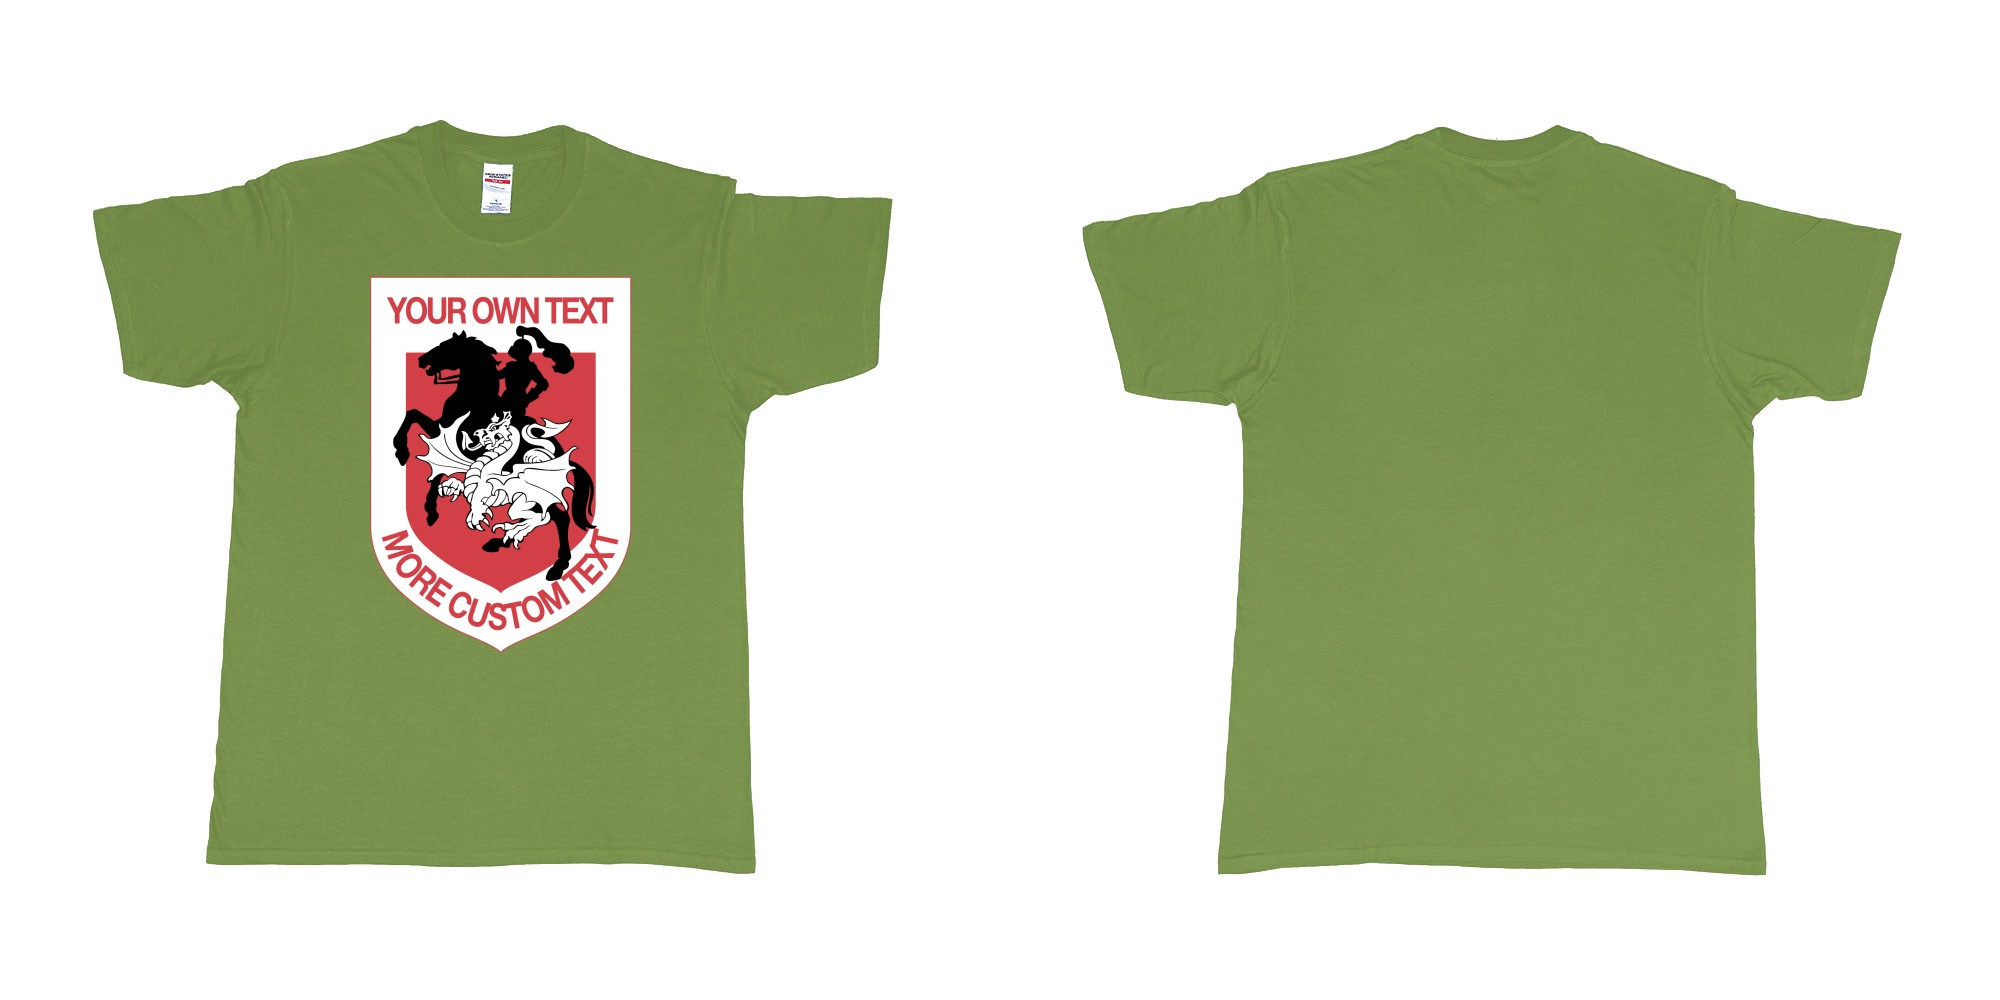 Custom tshirt design st george illawarra dragons custom design in fabric color military-green choice your own text made in Bali by The Pirate Way